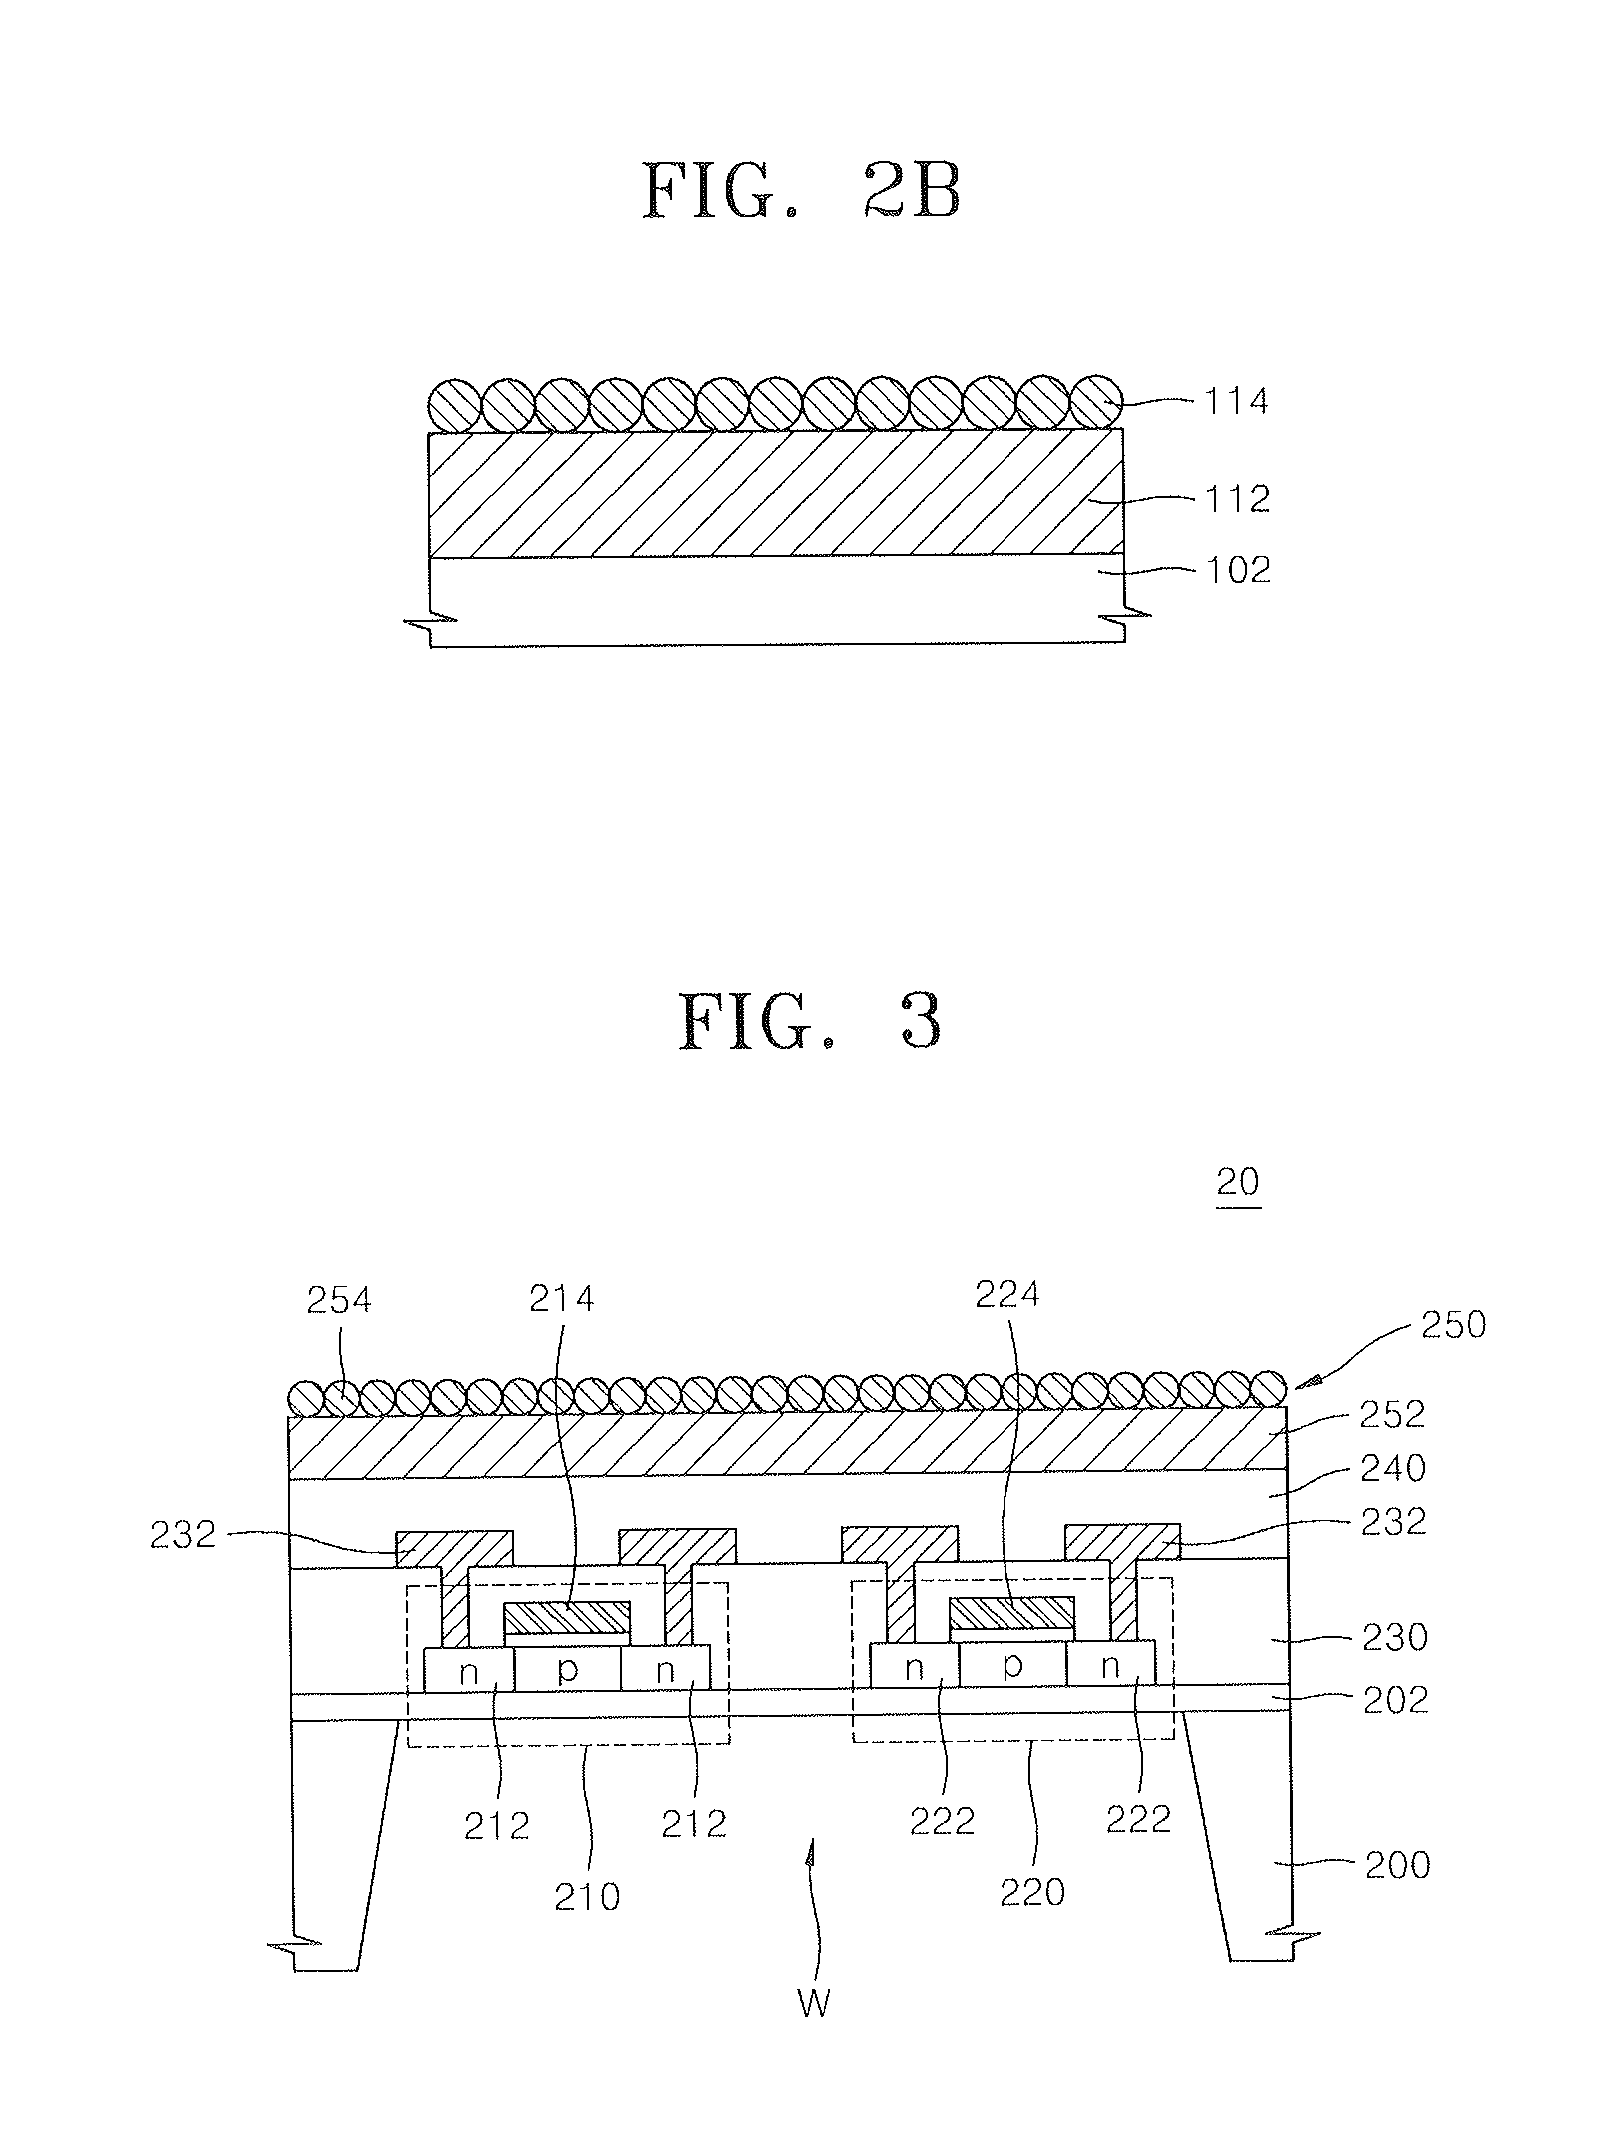 Method of forming sensor for detecting gases and biochemical materials, integrated circuit having the sensor, and method of manufacturing the integrated circuit